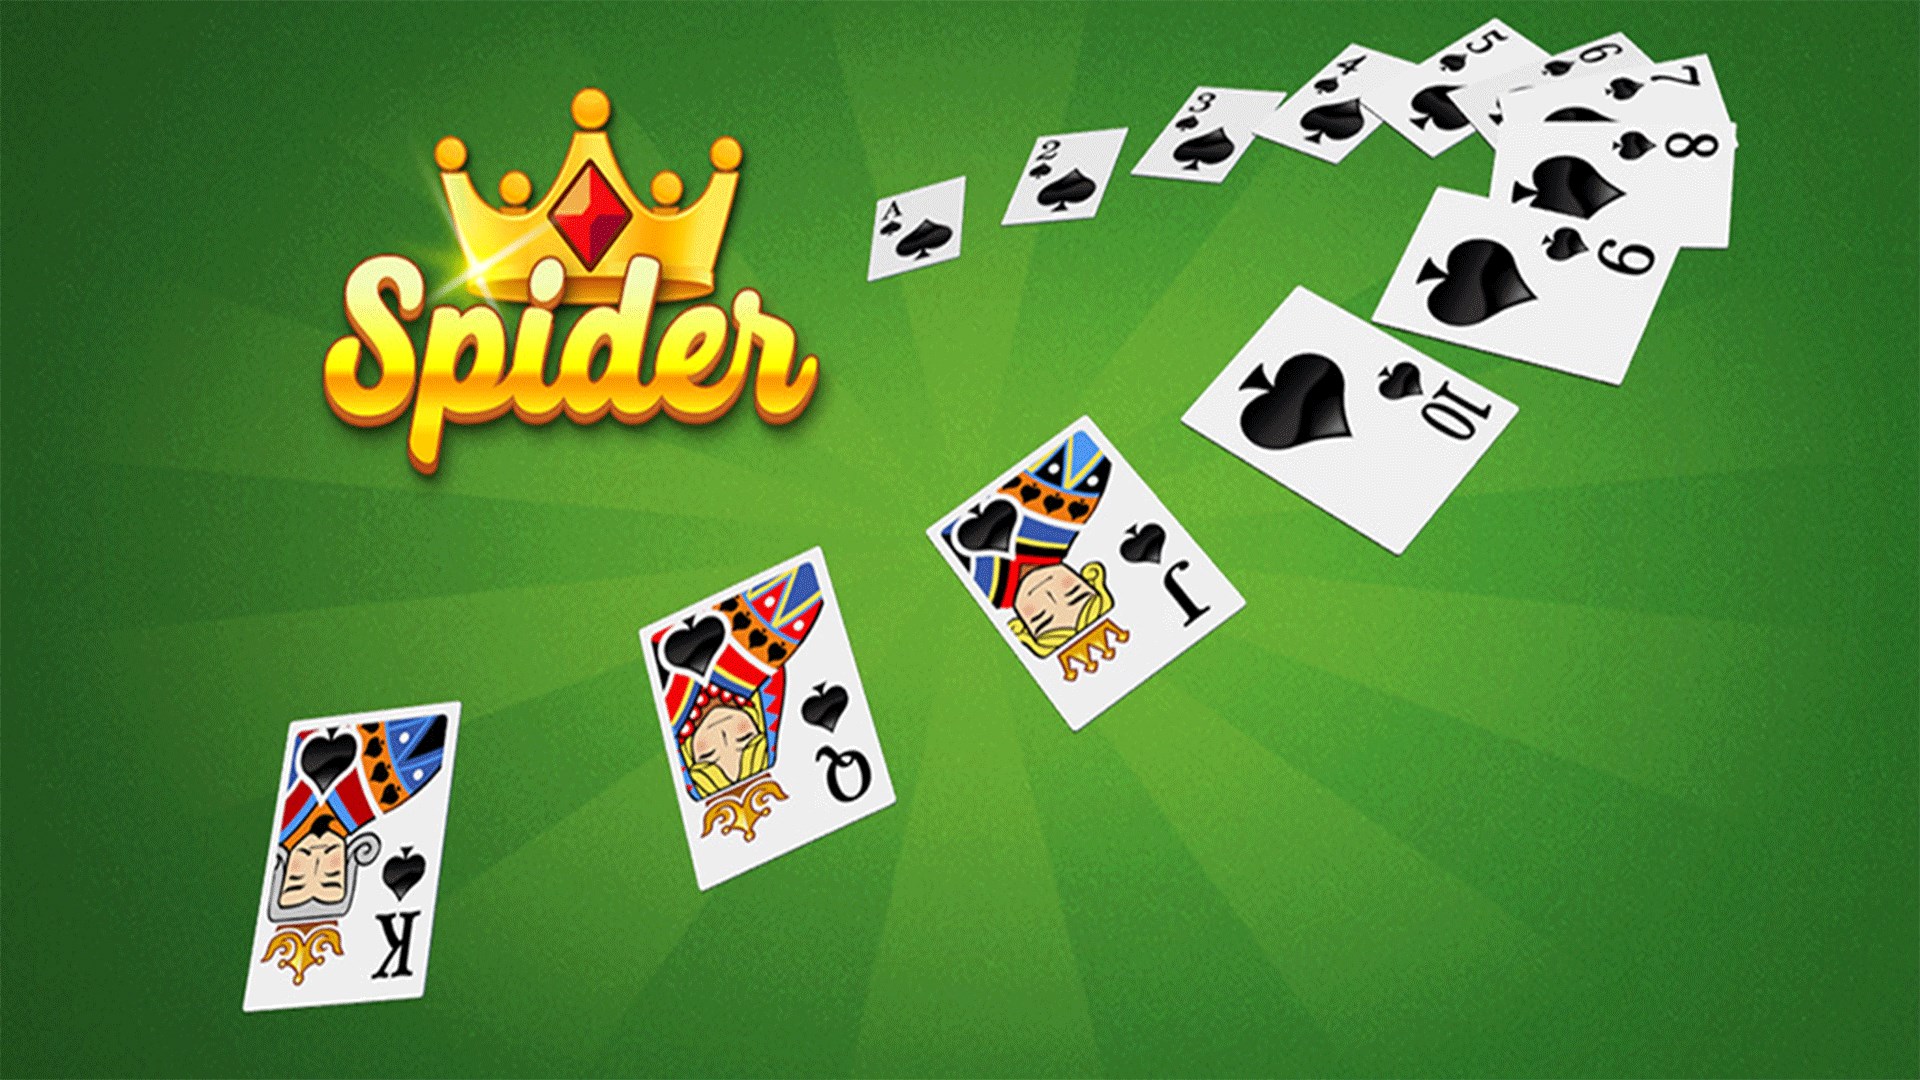 Spider Solitaire․ on the App Store